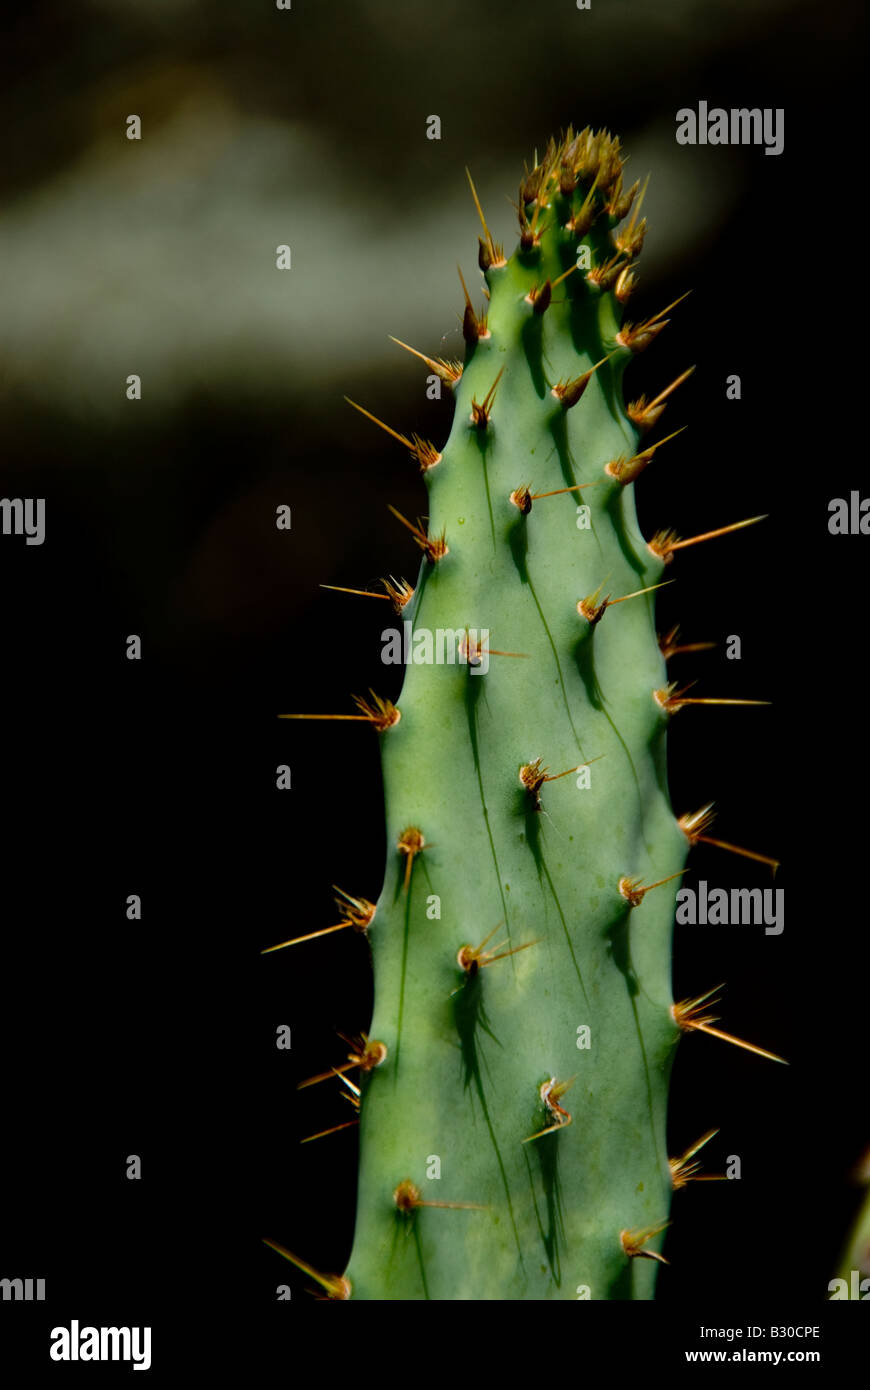 A branch of a cactus against a dark background with orange spikes highlighted Stock Photo